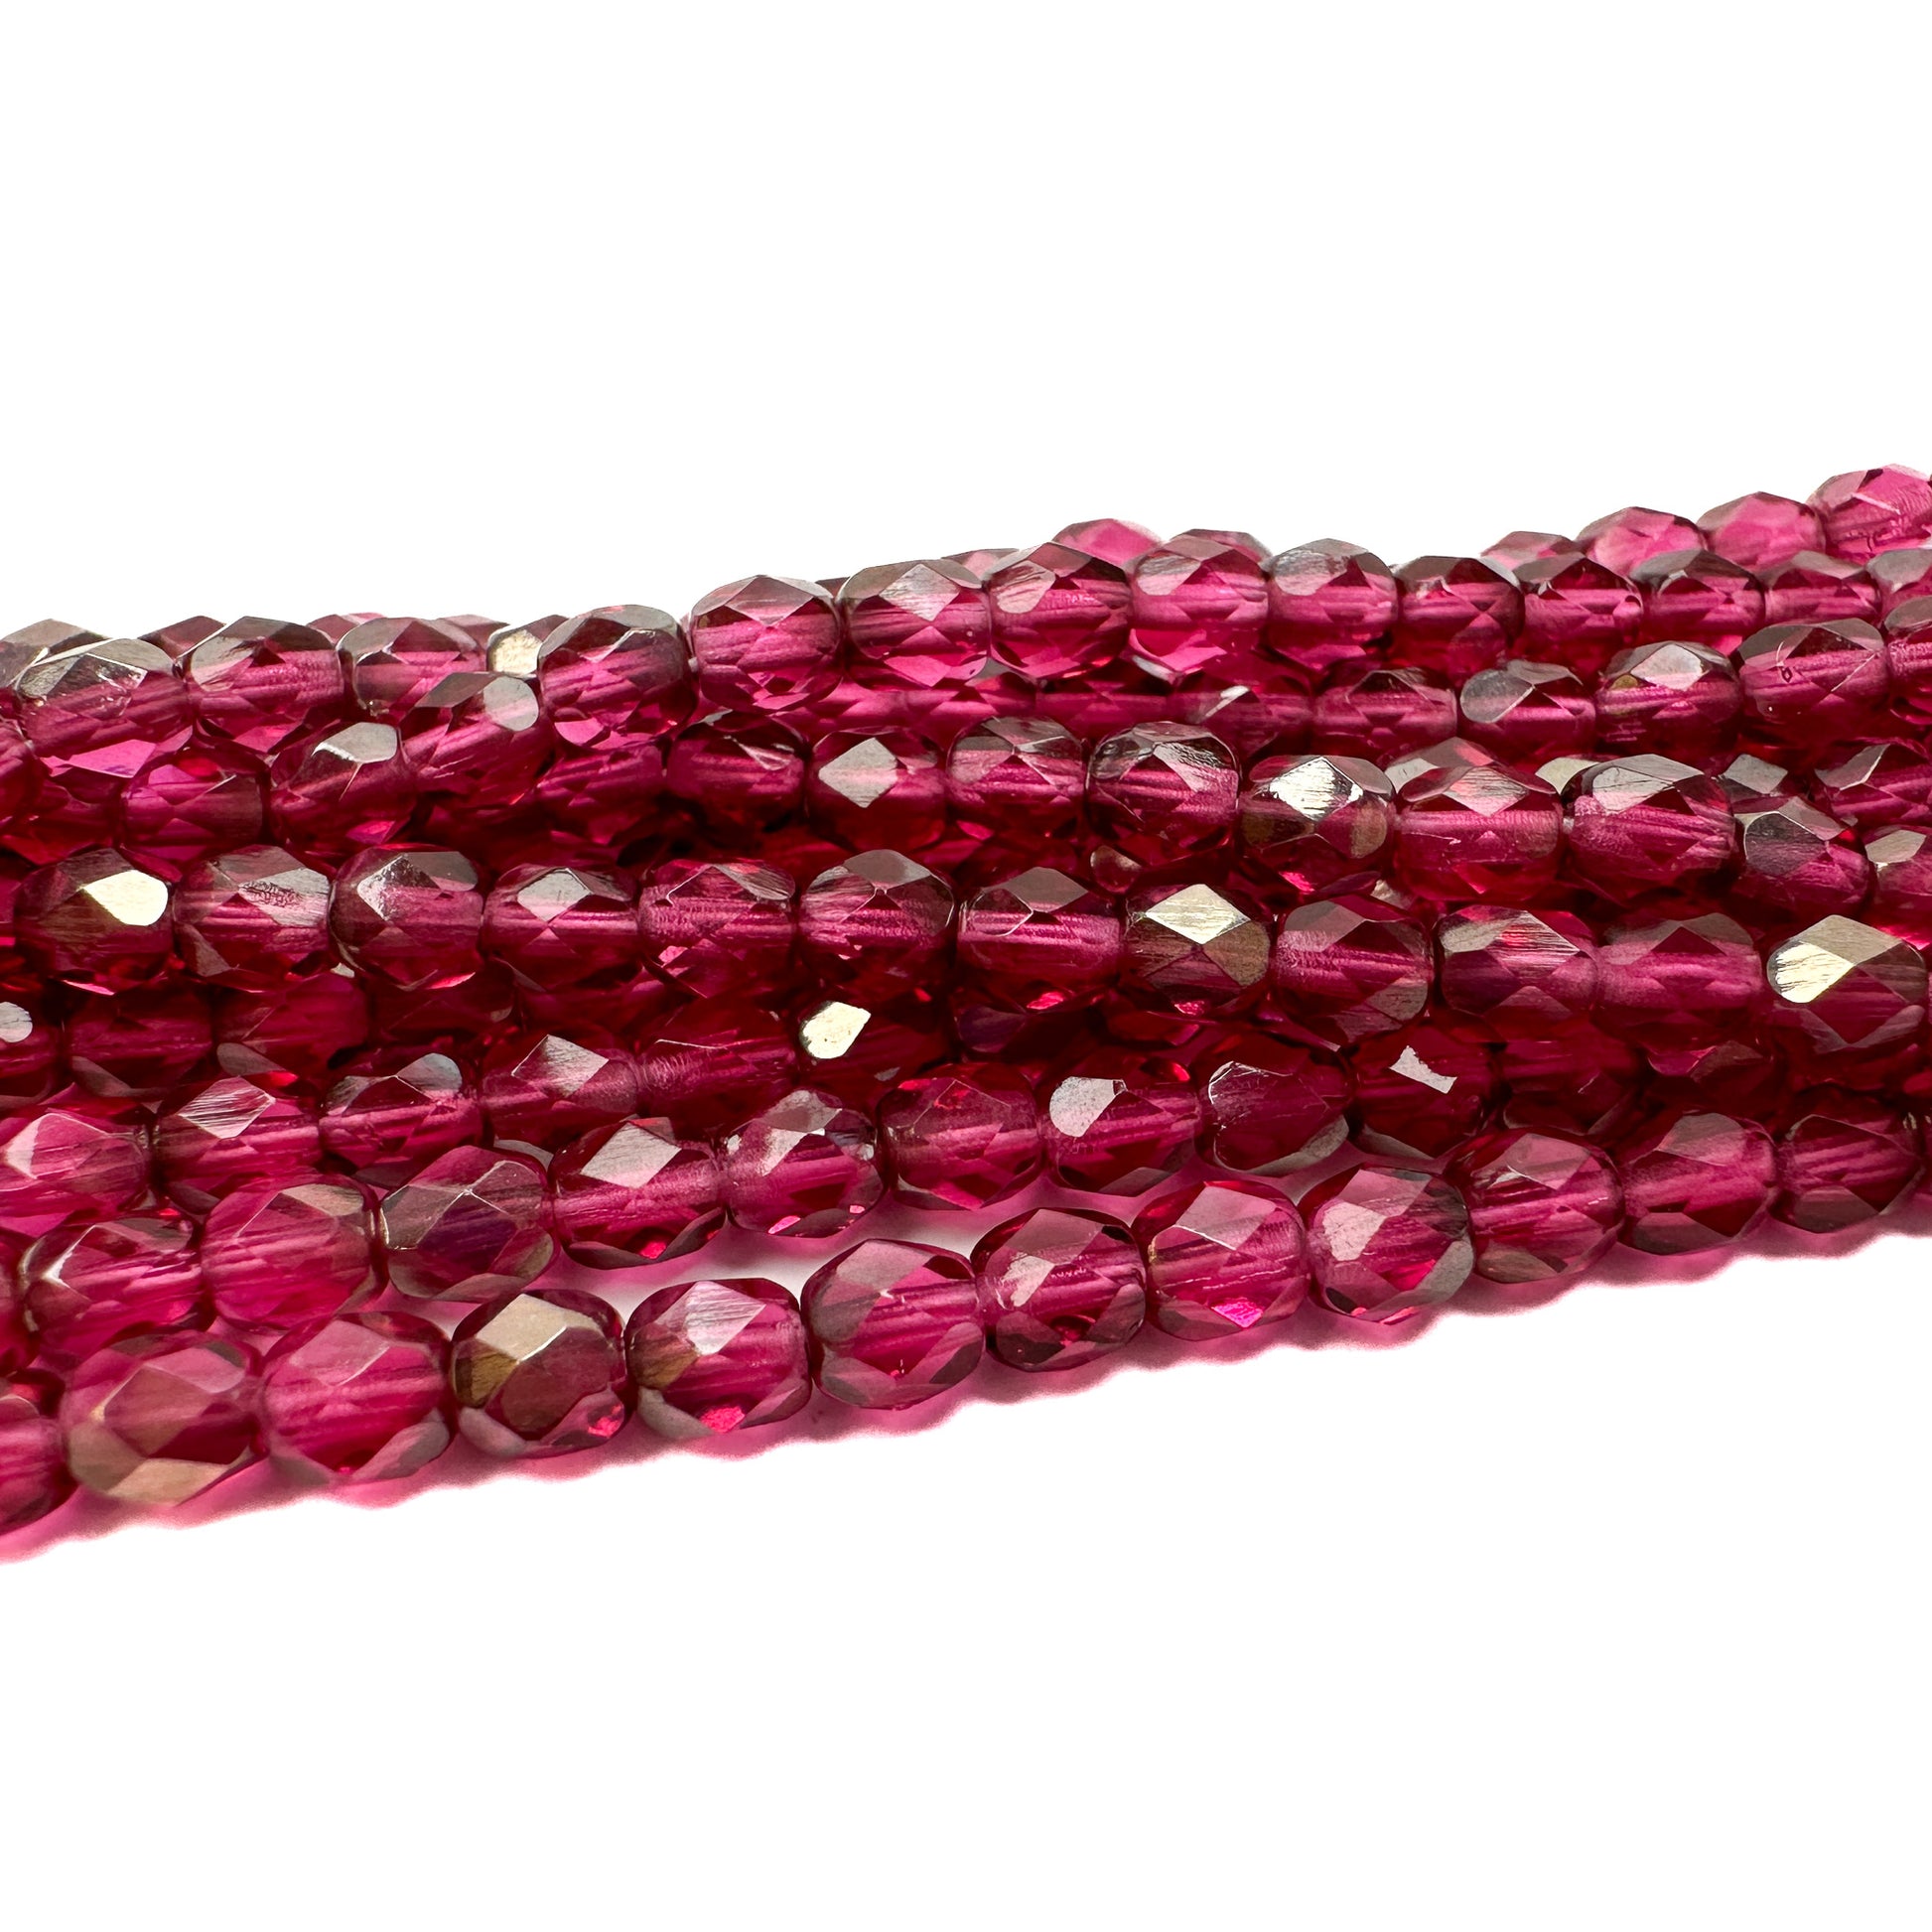 Fuchsia with Platinum Half Coat 4mm Faceted Glass Bead - 50 pcs.-The Bead Gallery Honolulu